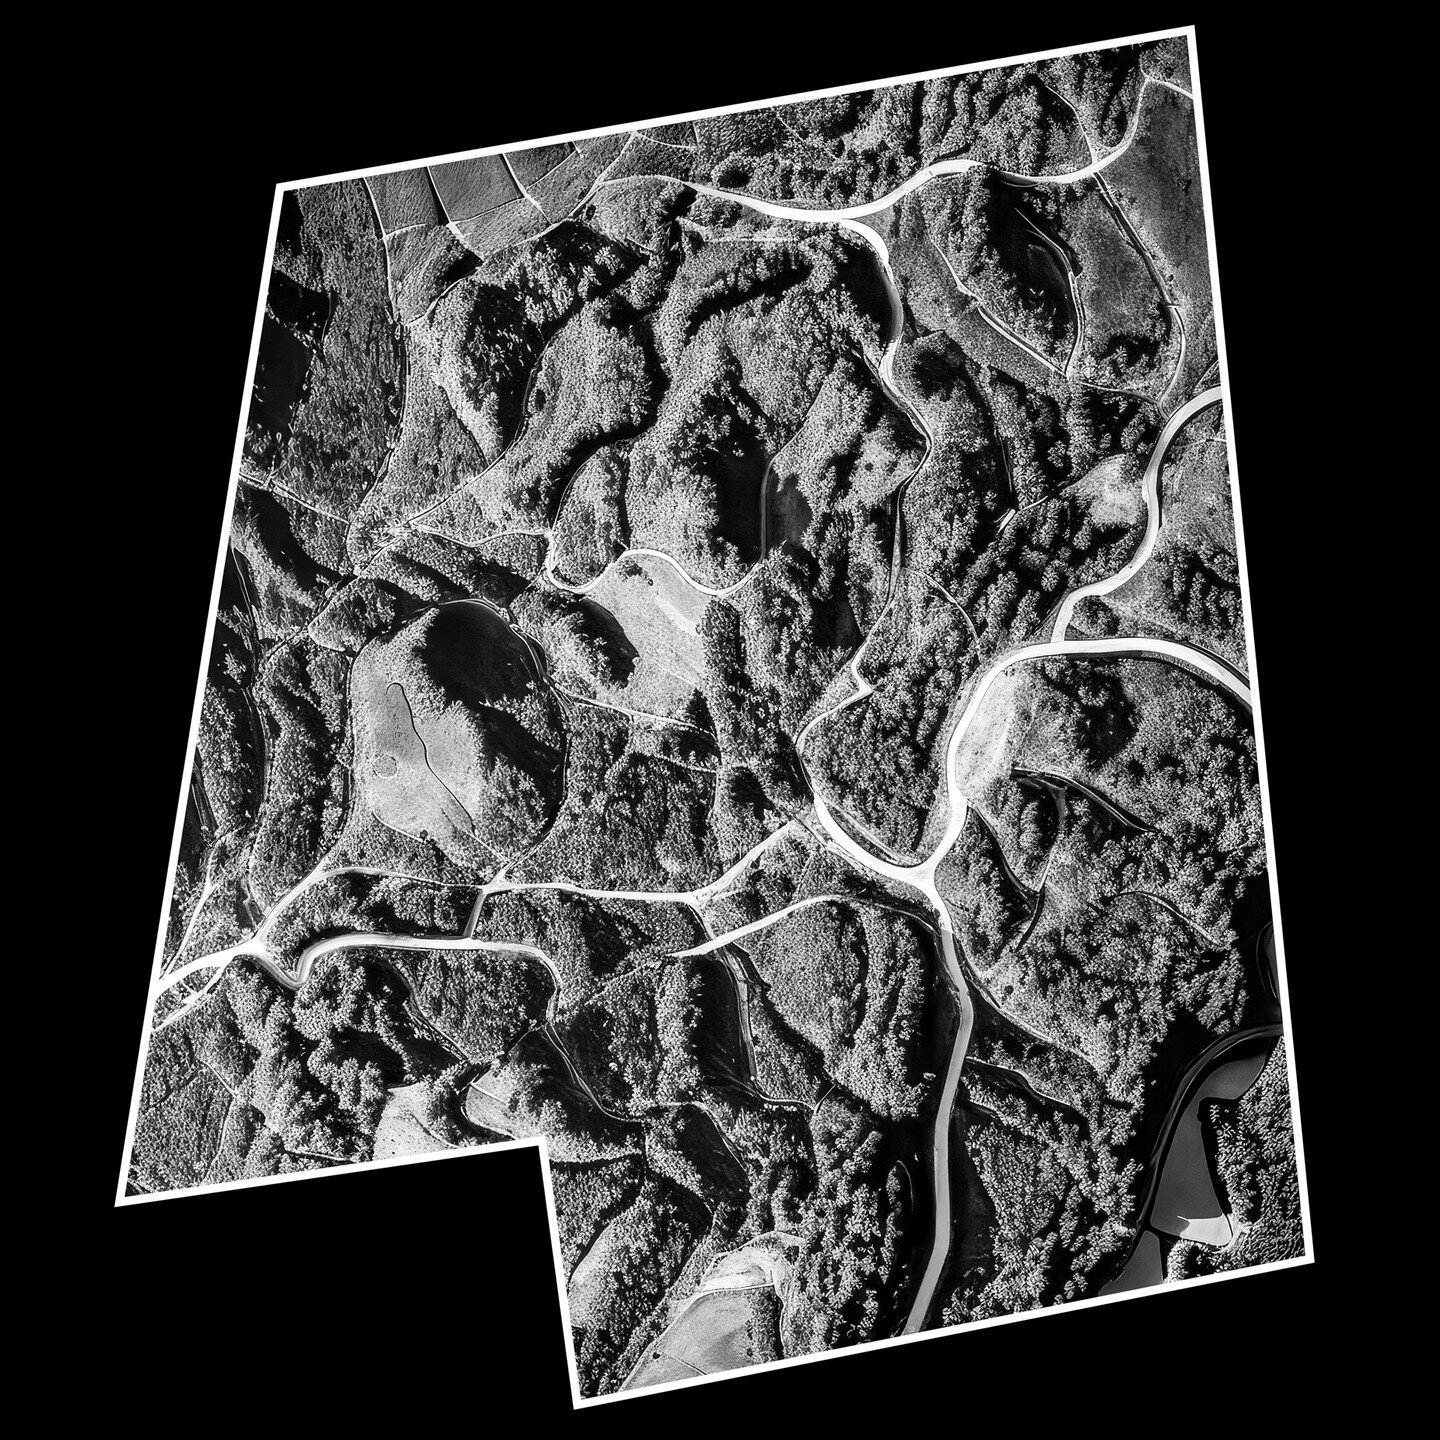 Proof of concept where I used a depth map AI model on my hometown's geographic height map in order to generate a fake aerial landscape.

The overall scale of the area is much smaller than the actual size of the town but I ended up liking that quirk.
